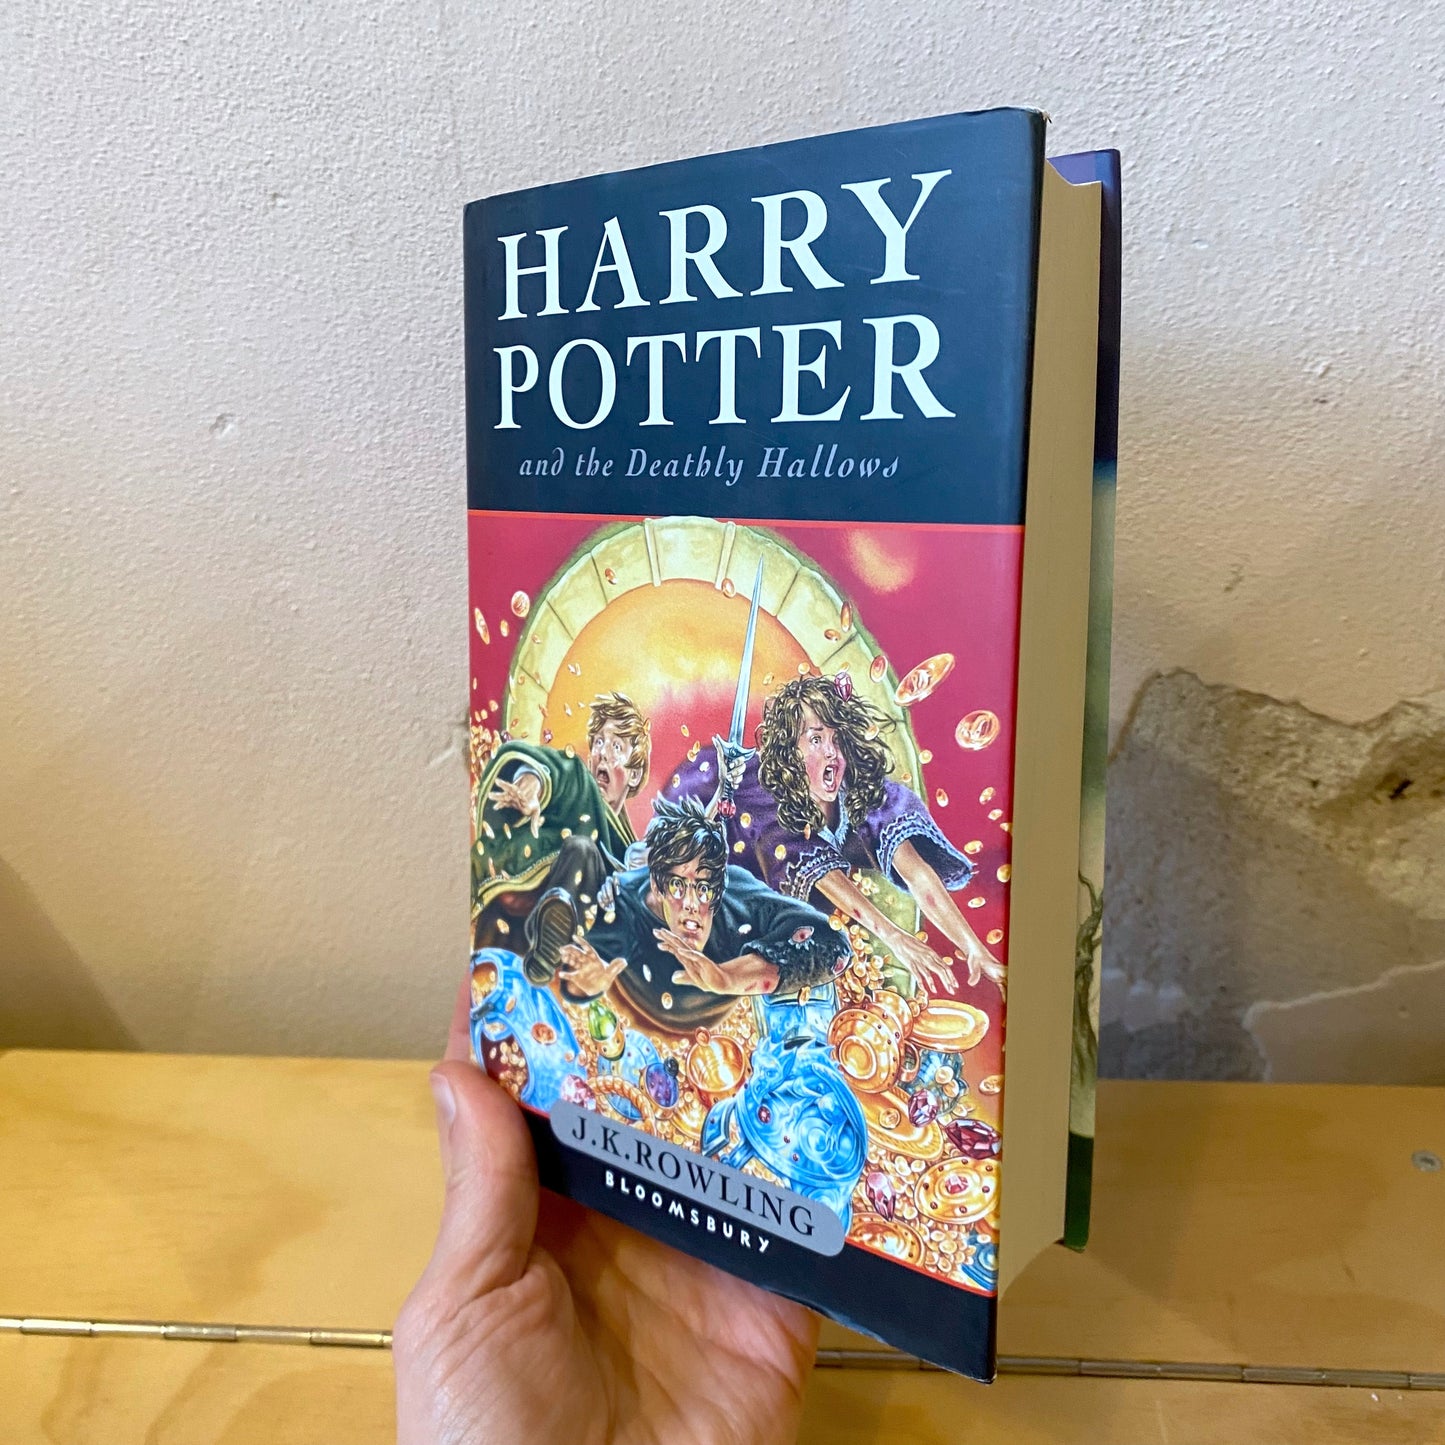 Harry Potter and the Deathly Hallows (1st edition) - J.K. Rowling